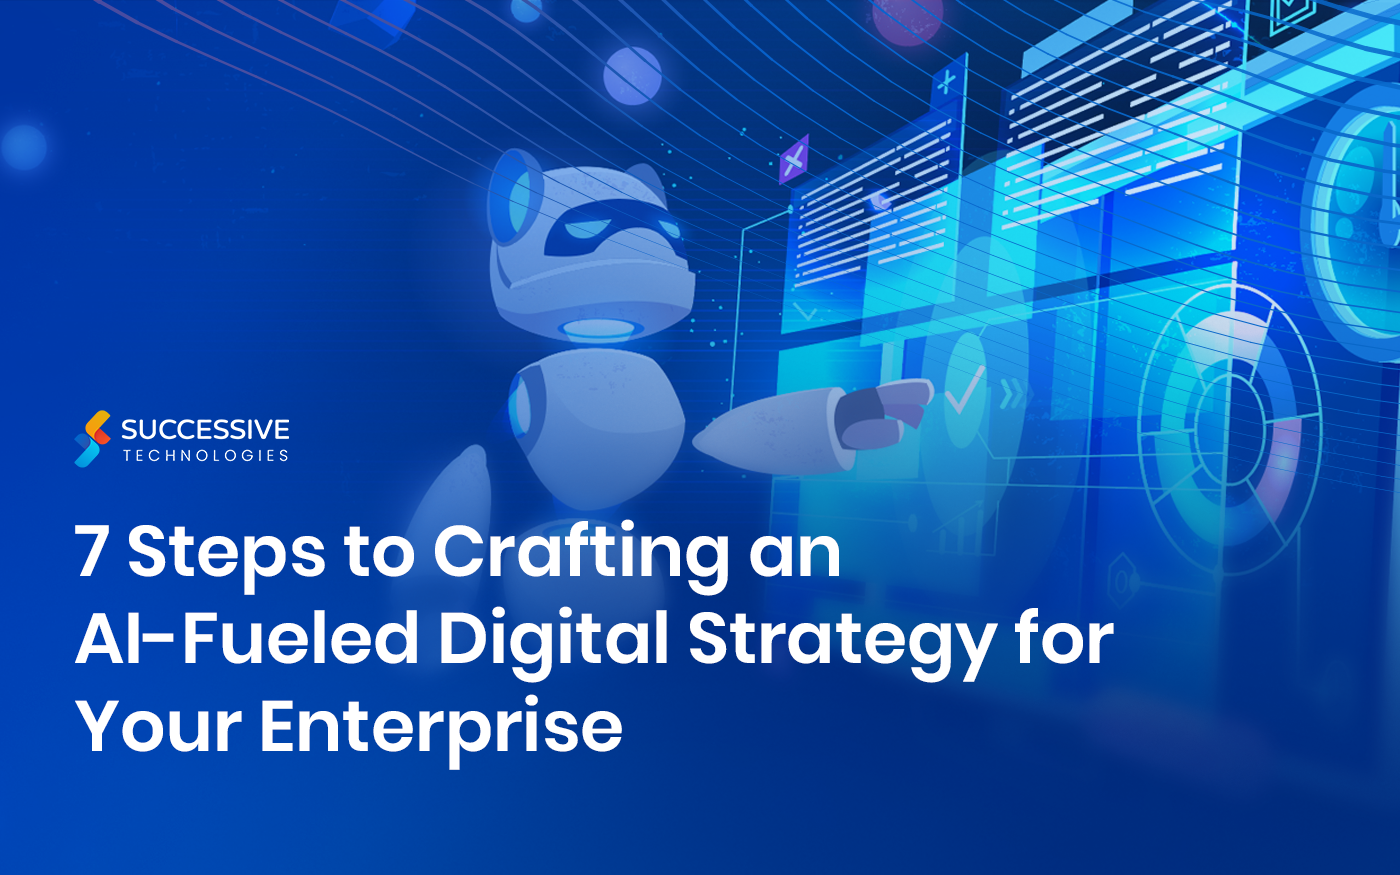 7 Steps to Crafting an AI-Fueled Digital Strategy for Your Enterprise